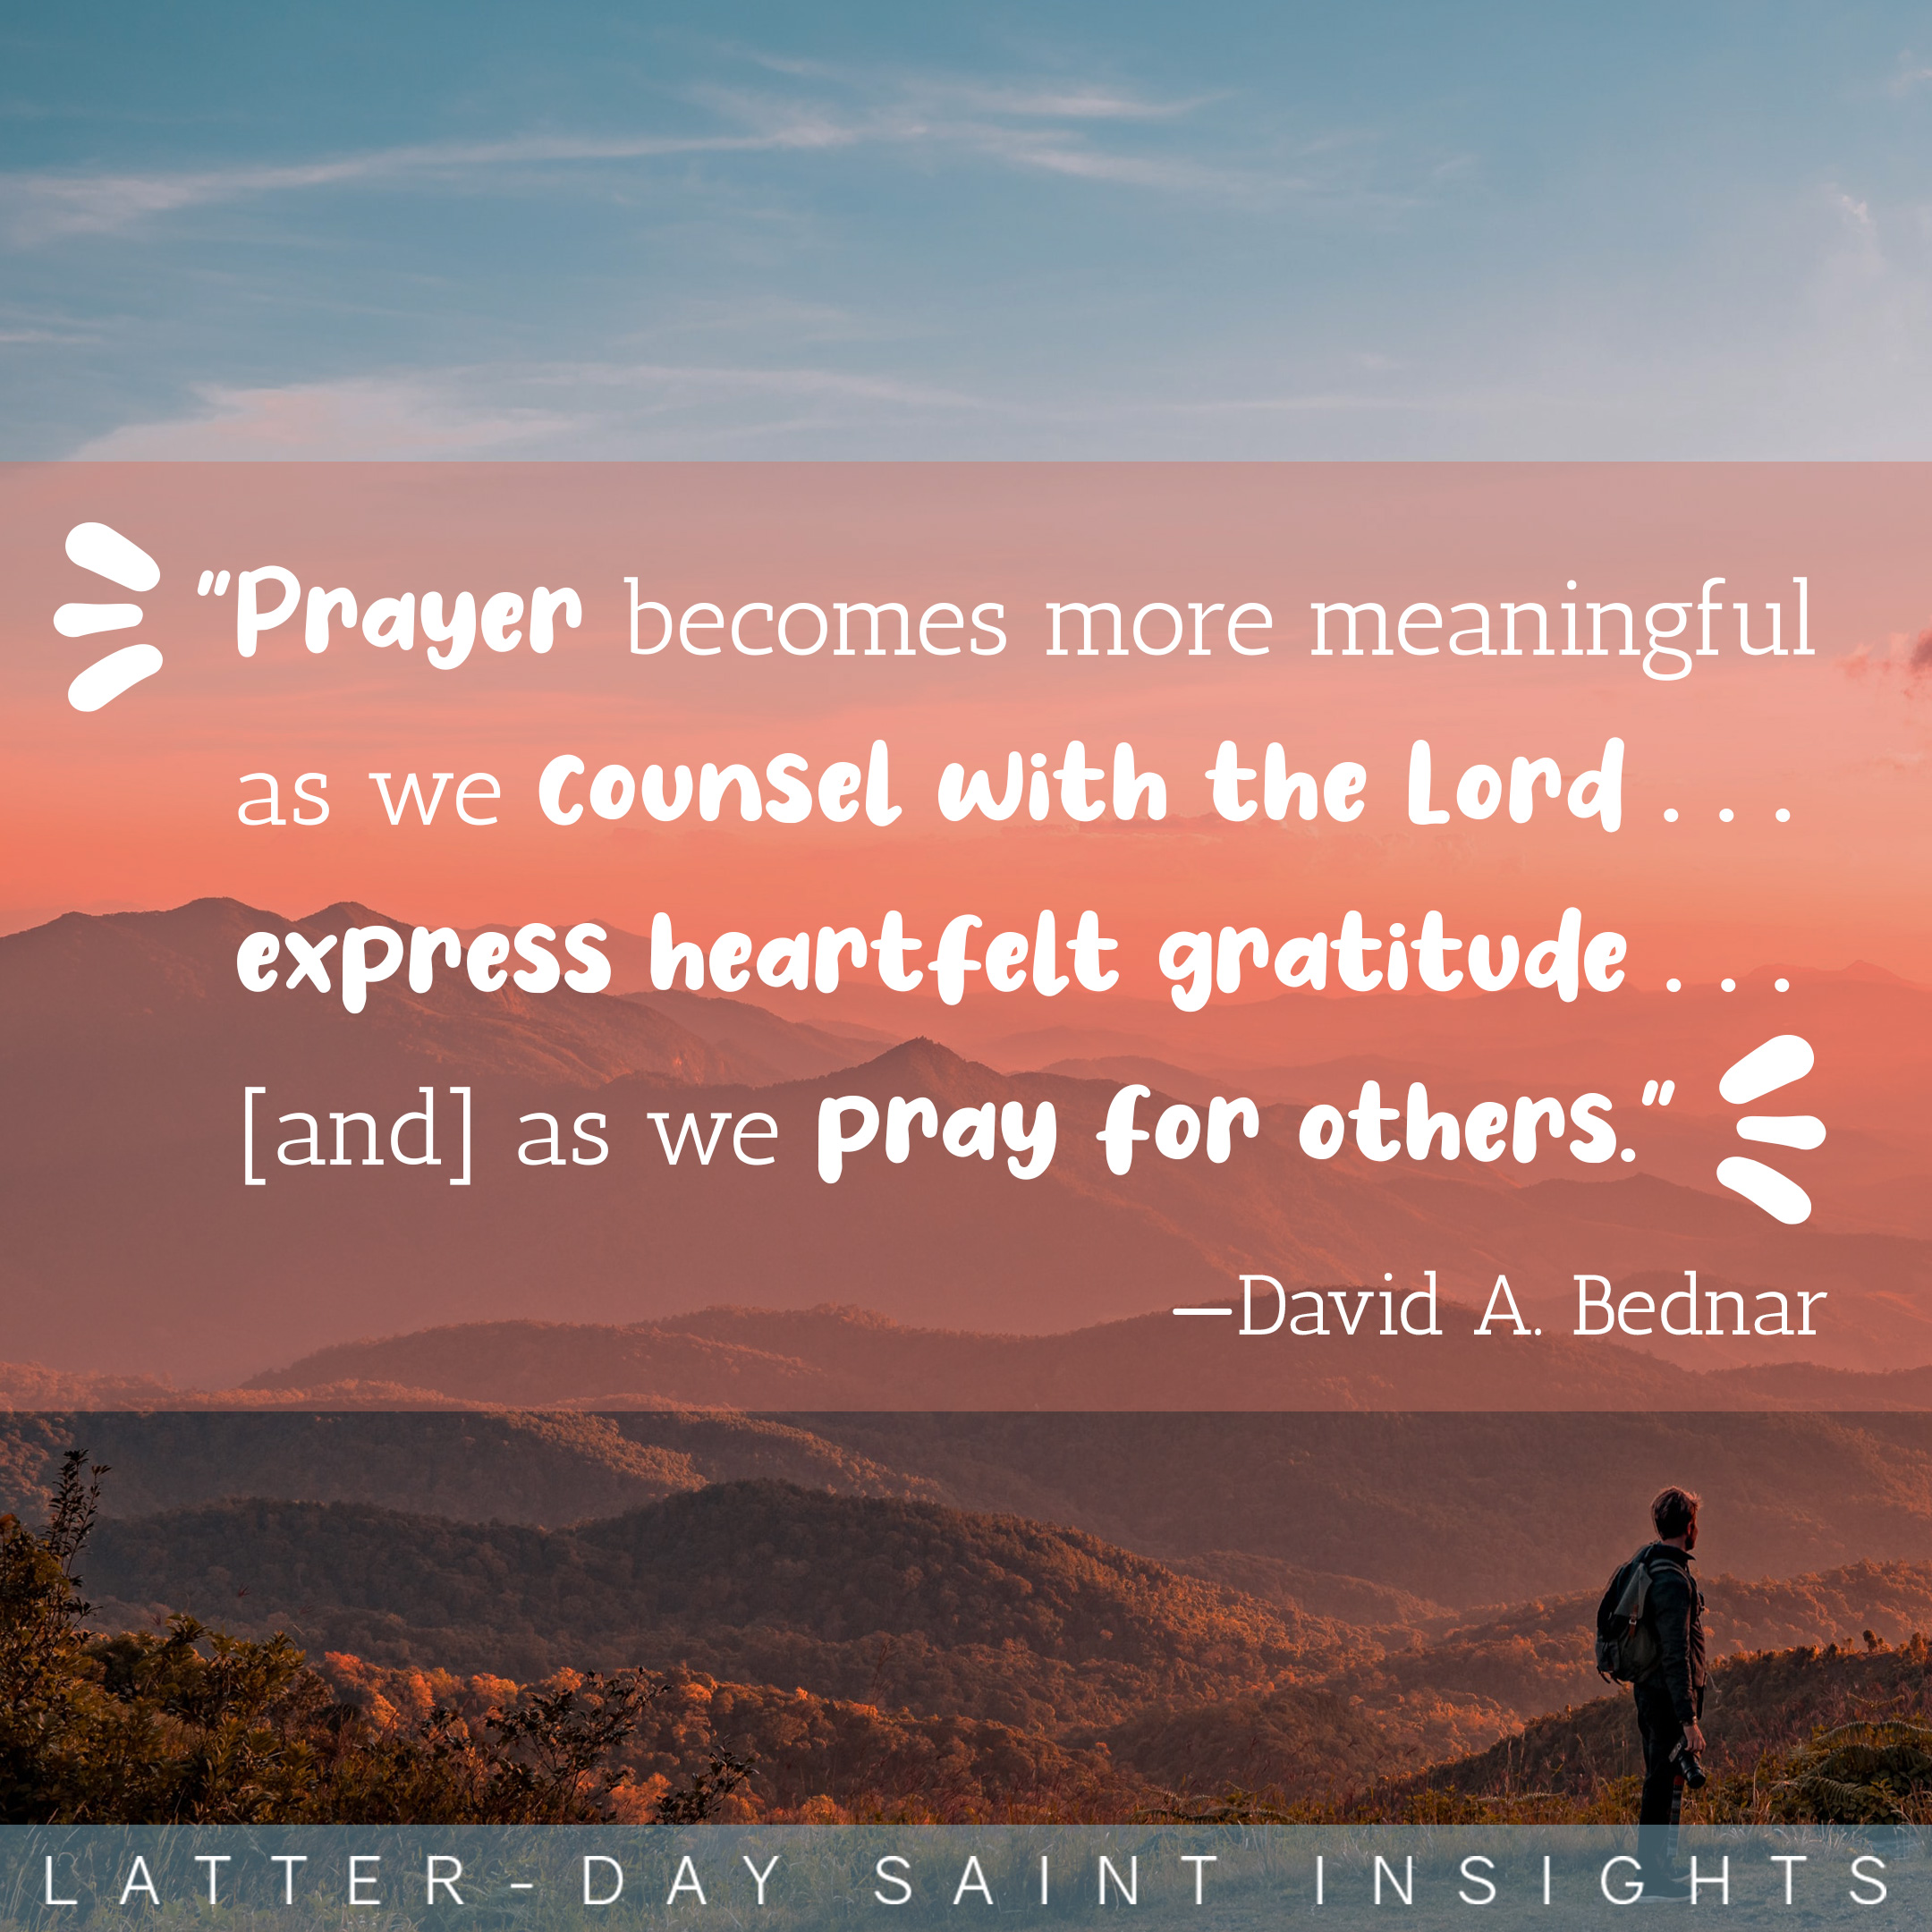 A silhouette of a man is standing on a mountain looking out at a beautiful sunset. There is a quote on the picture that says, "Prayer becomes more meaningful as we counsel with the Lord . . . express heartfelt gratitude . . . [and] as we pray for others."